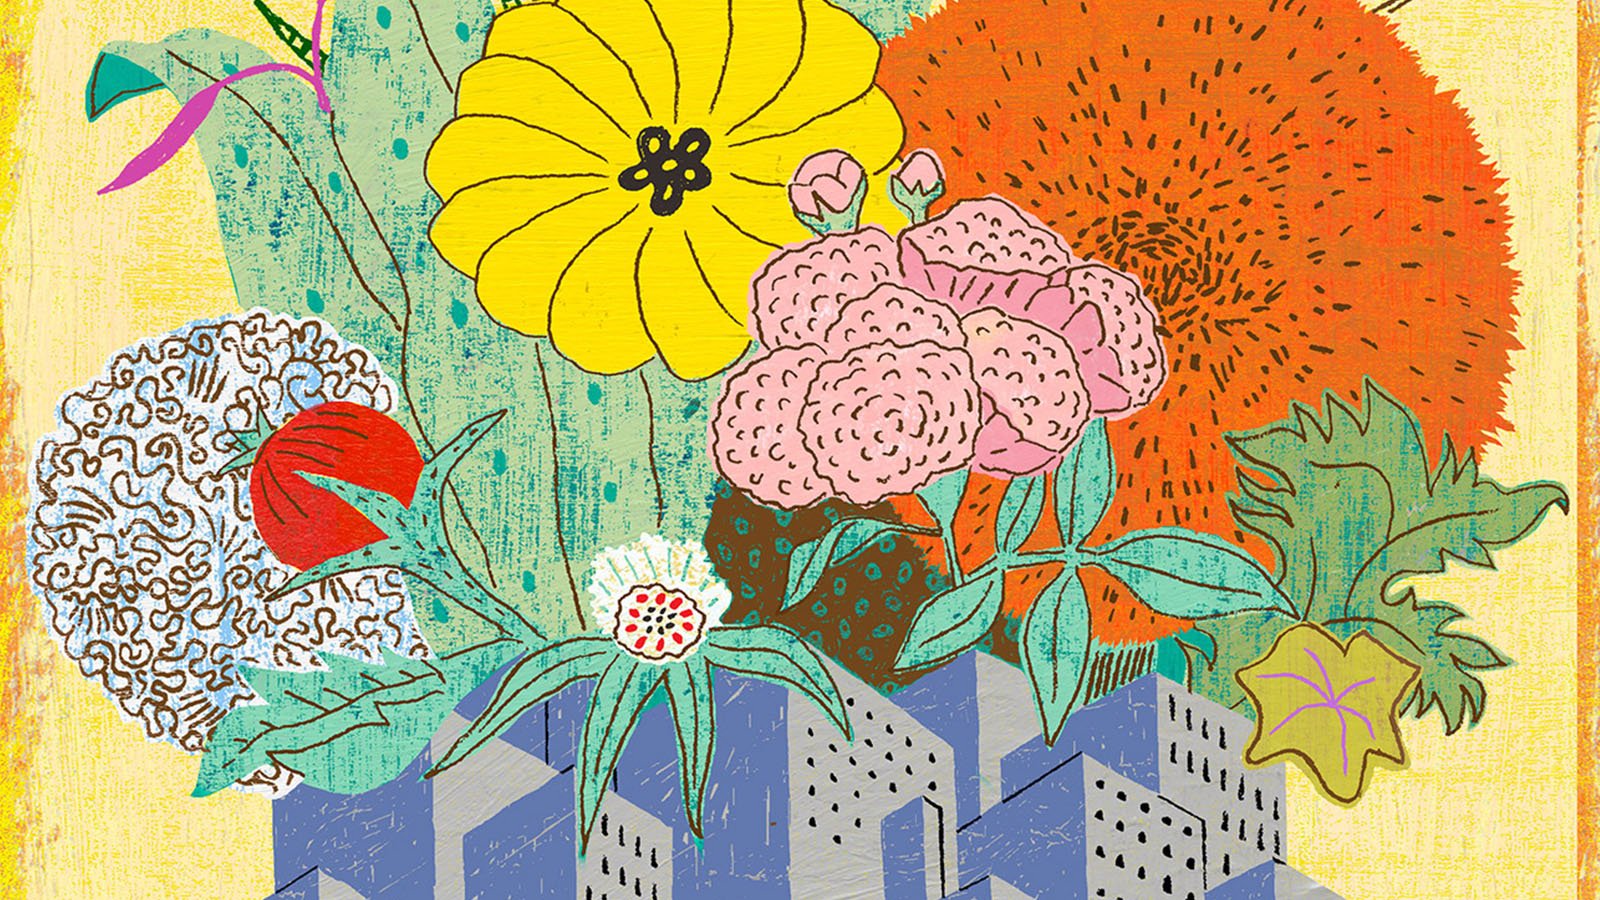 Illustration of florals overtop city buildings